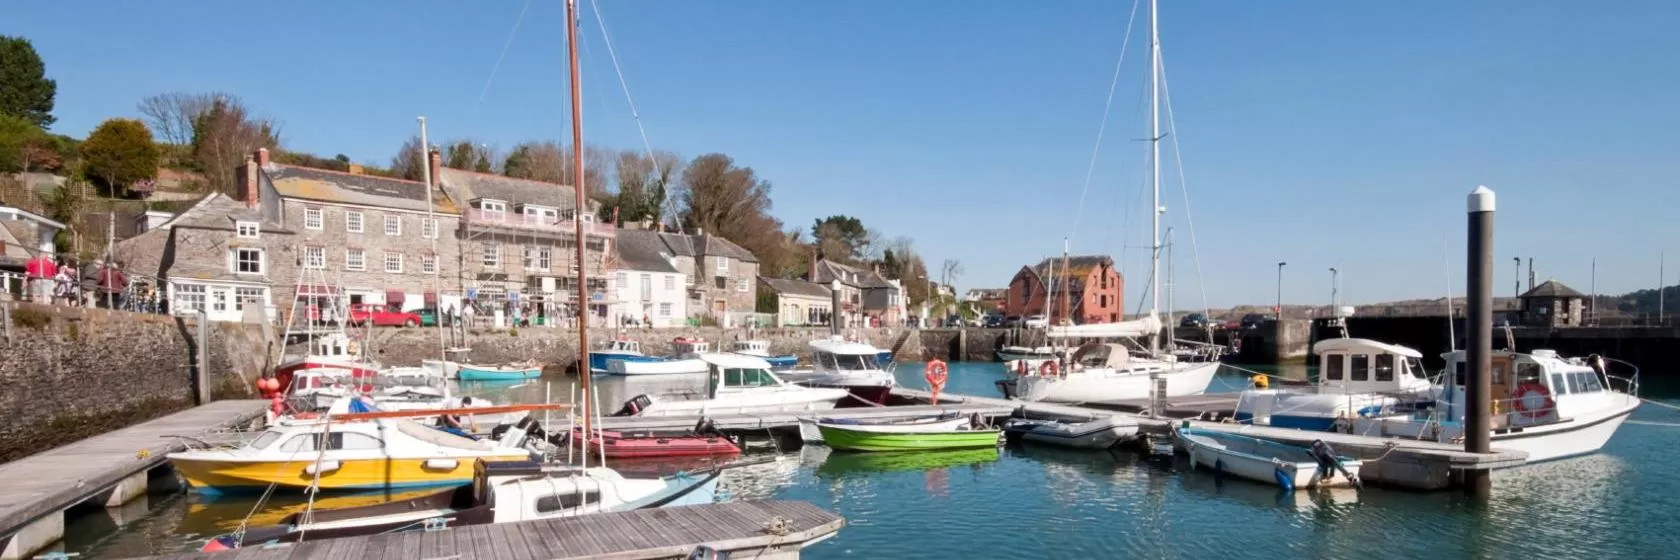 Padstow, Cornwall Hotels